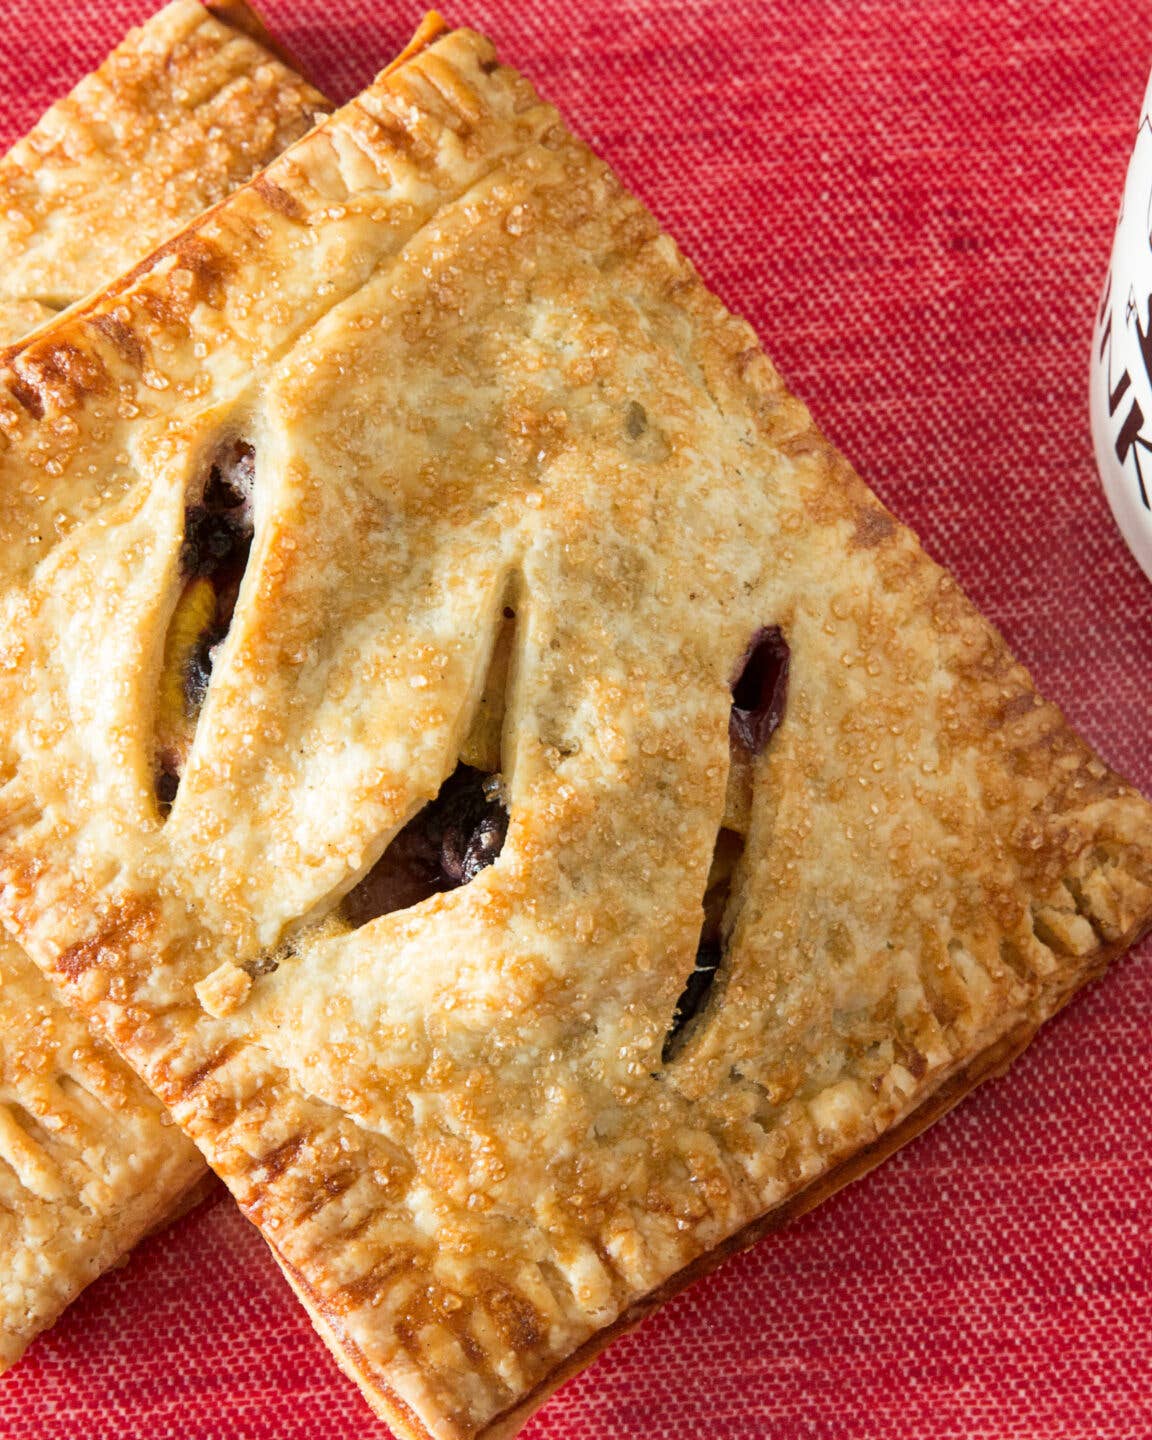 Video: Ovenly’s Nectarine and Blueberry Hand Pies